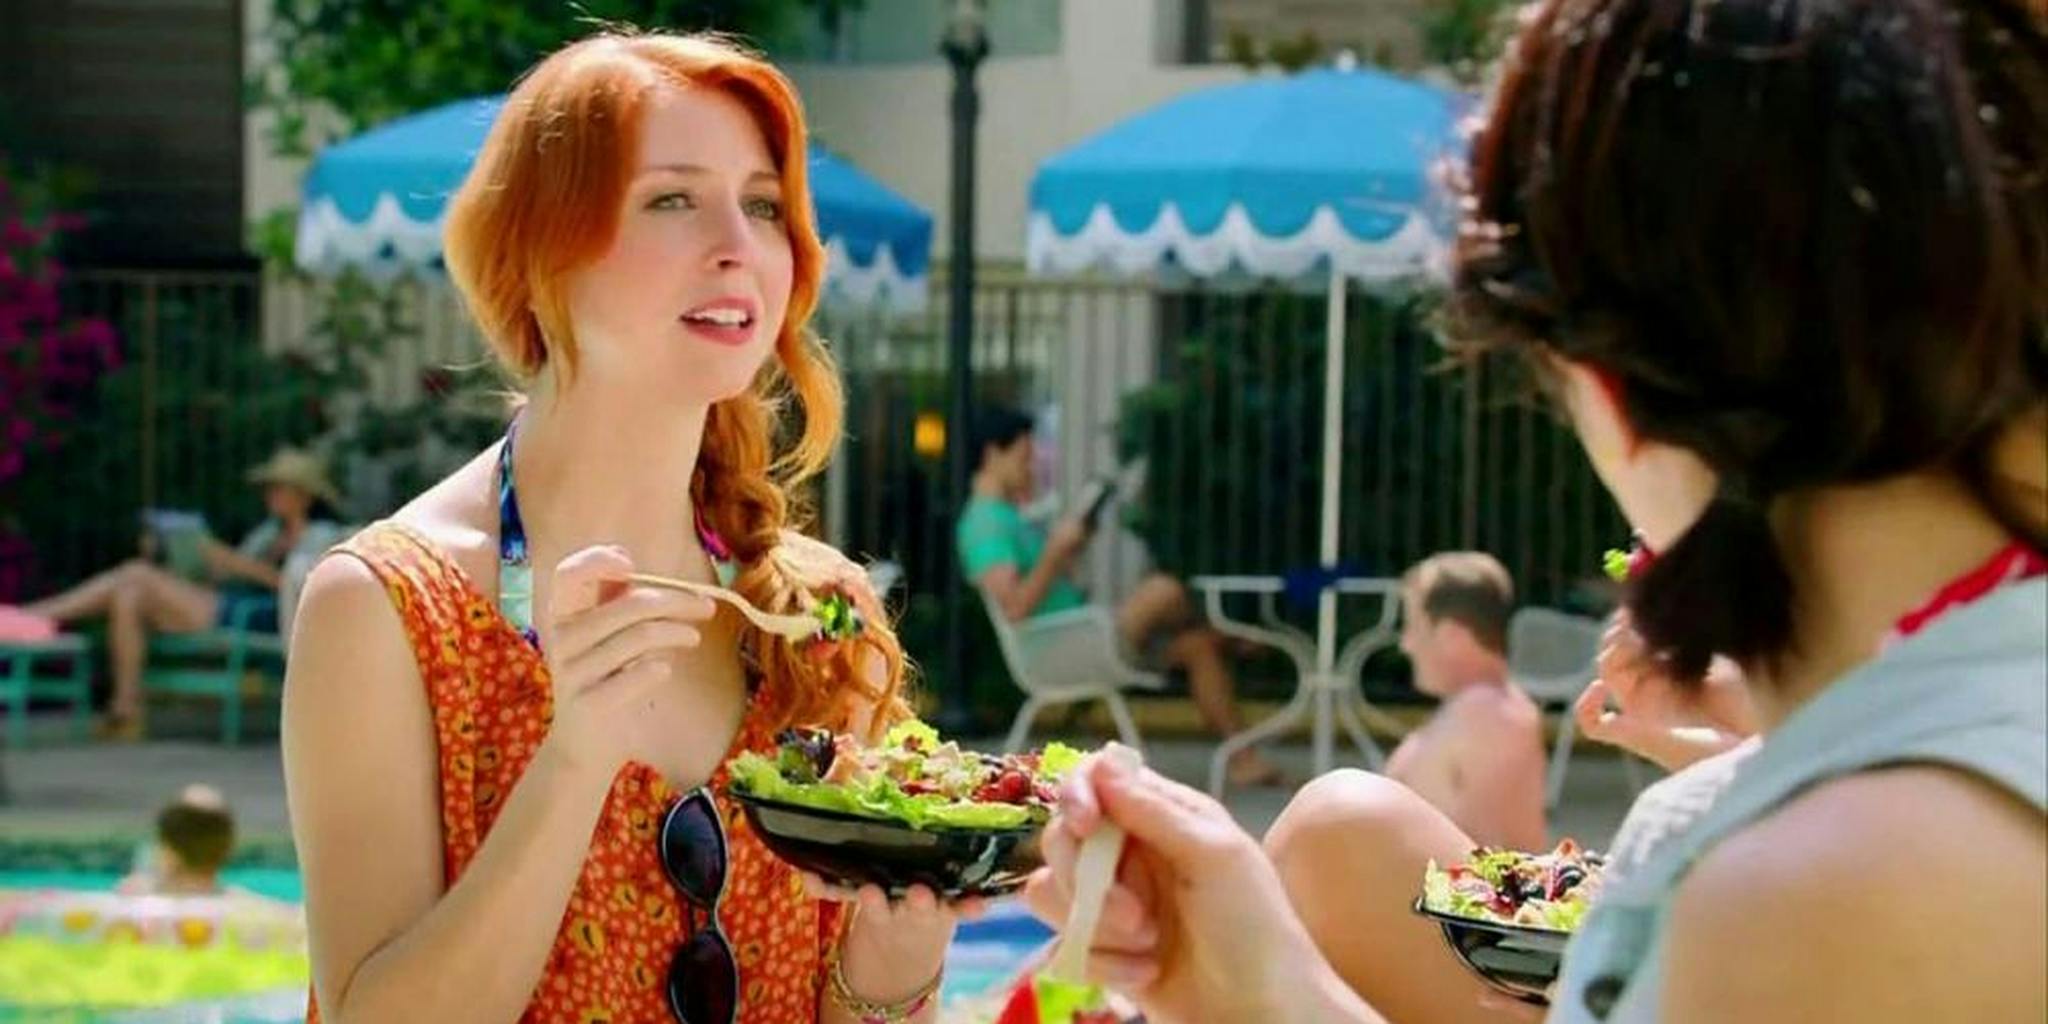 Do Redheads Make Us Hungry The Daily Dot 1969